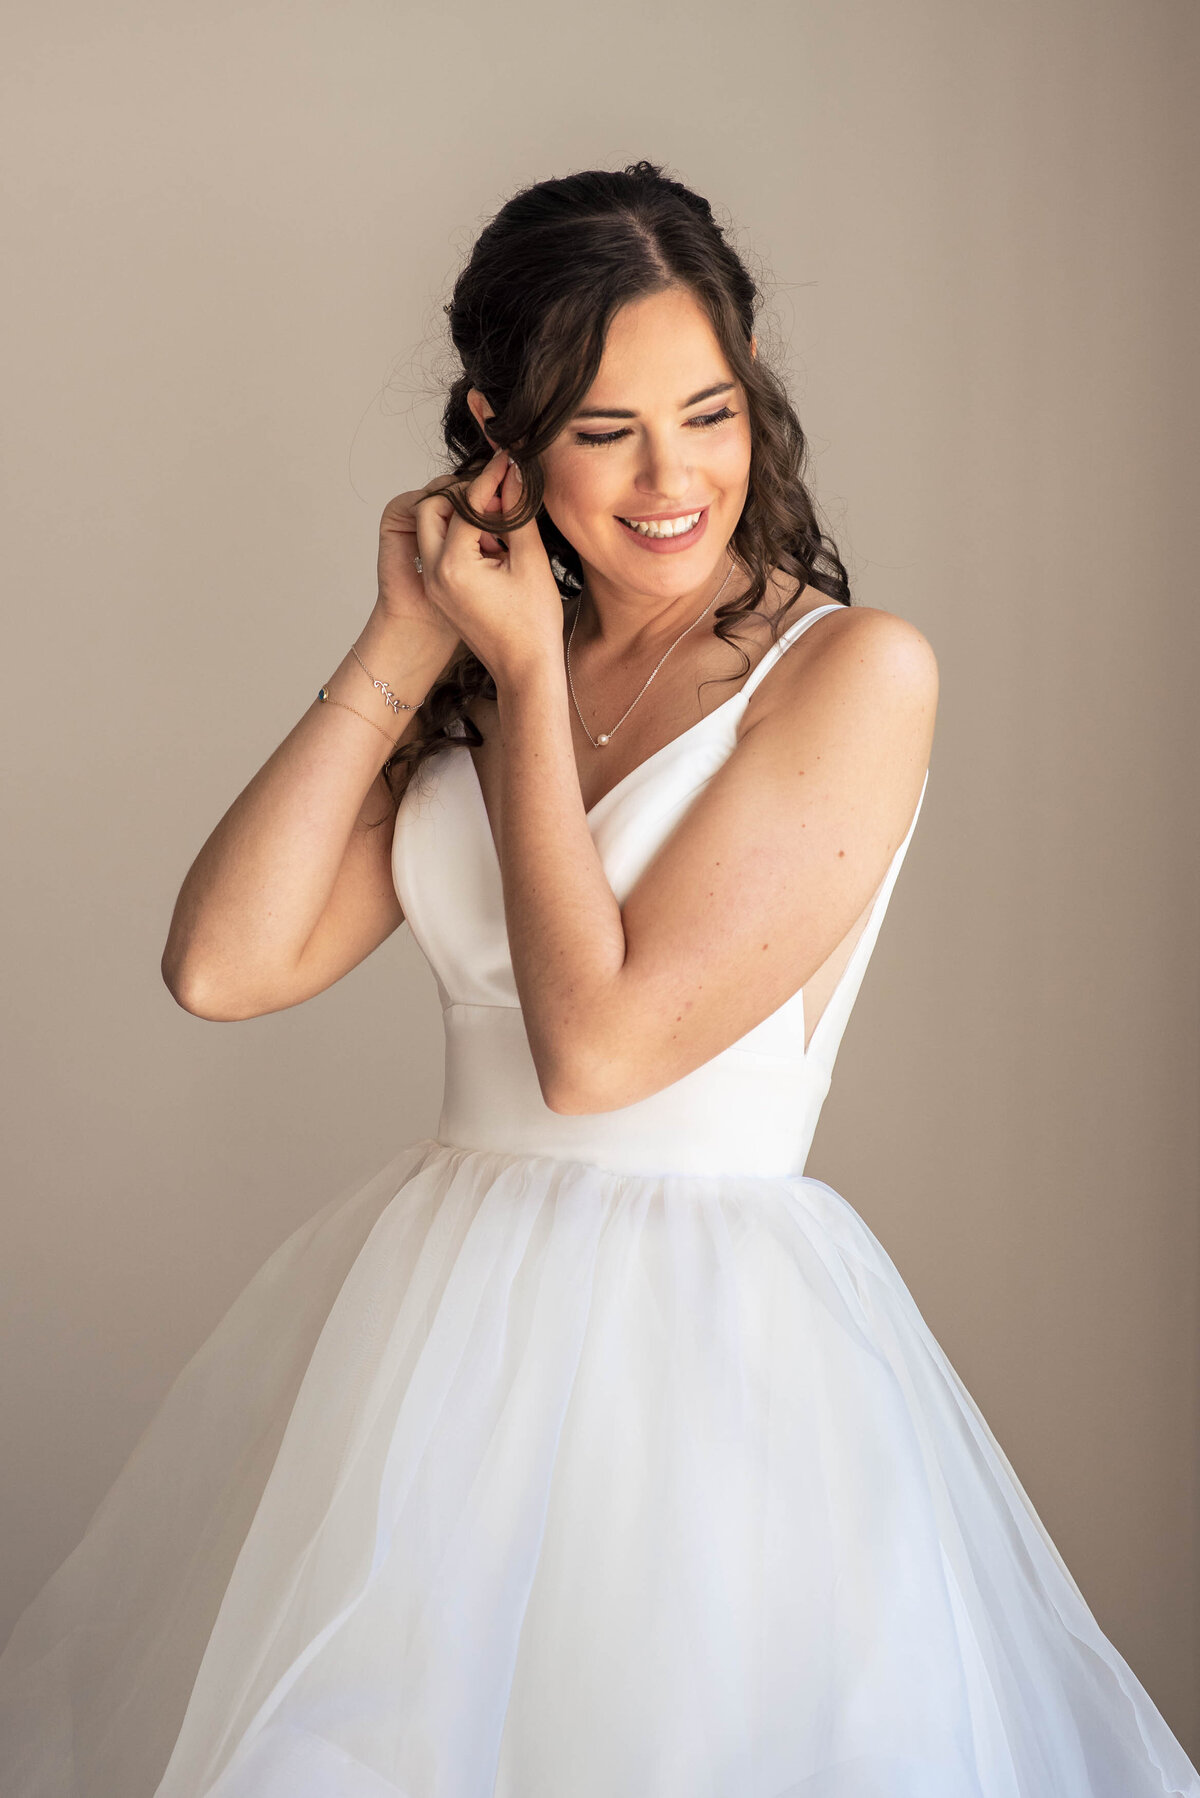 Bride in her white wedding dress looking down smiling while putting on her earrings getting ready for her wedding by Charlotte wedding photographers DeLong Photography